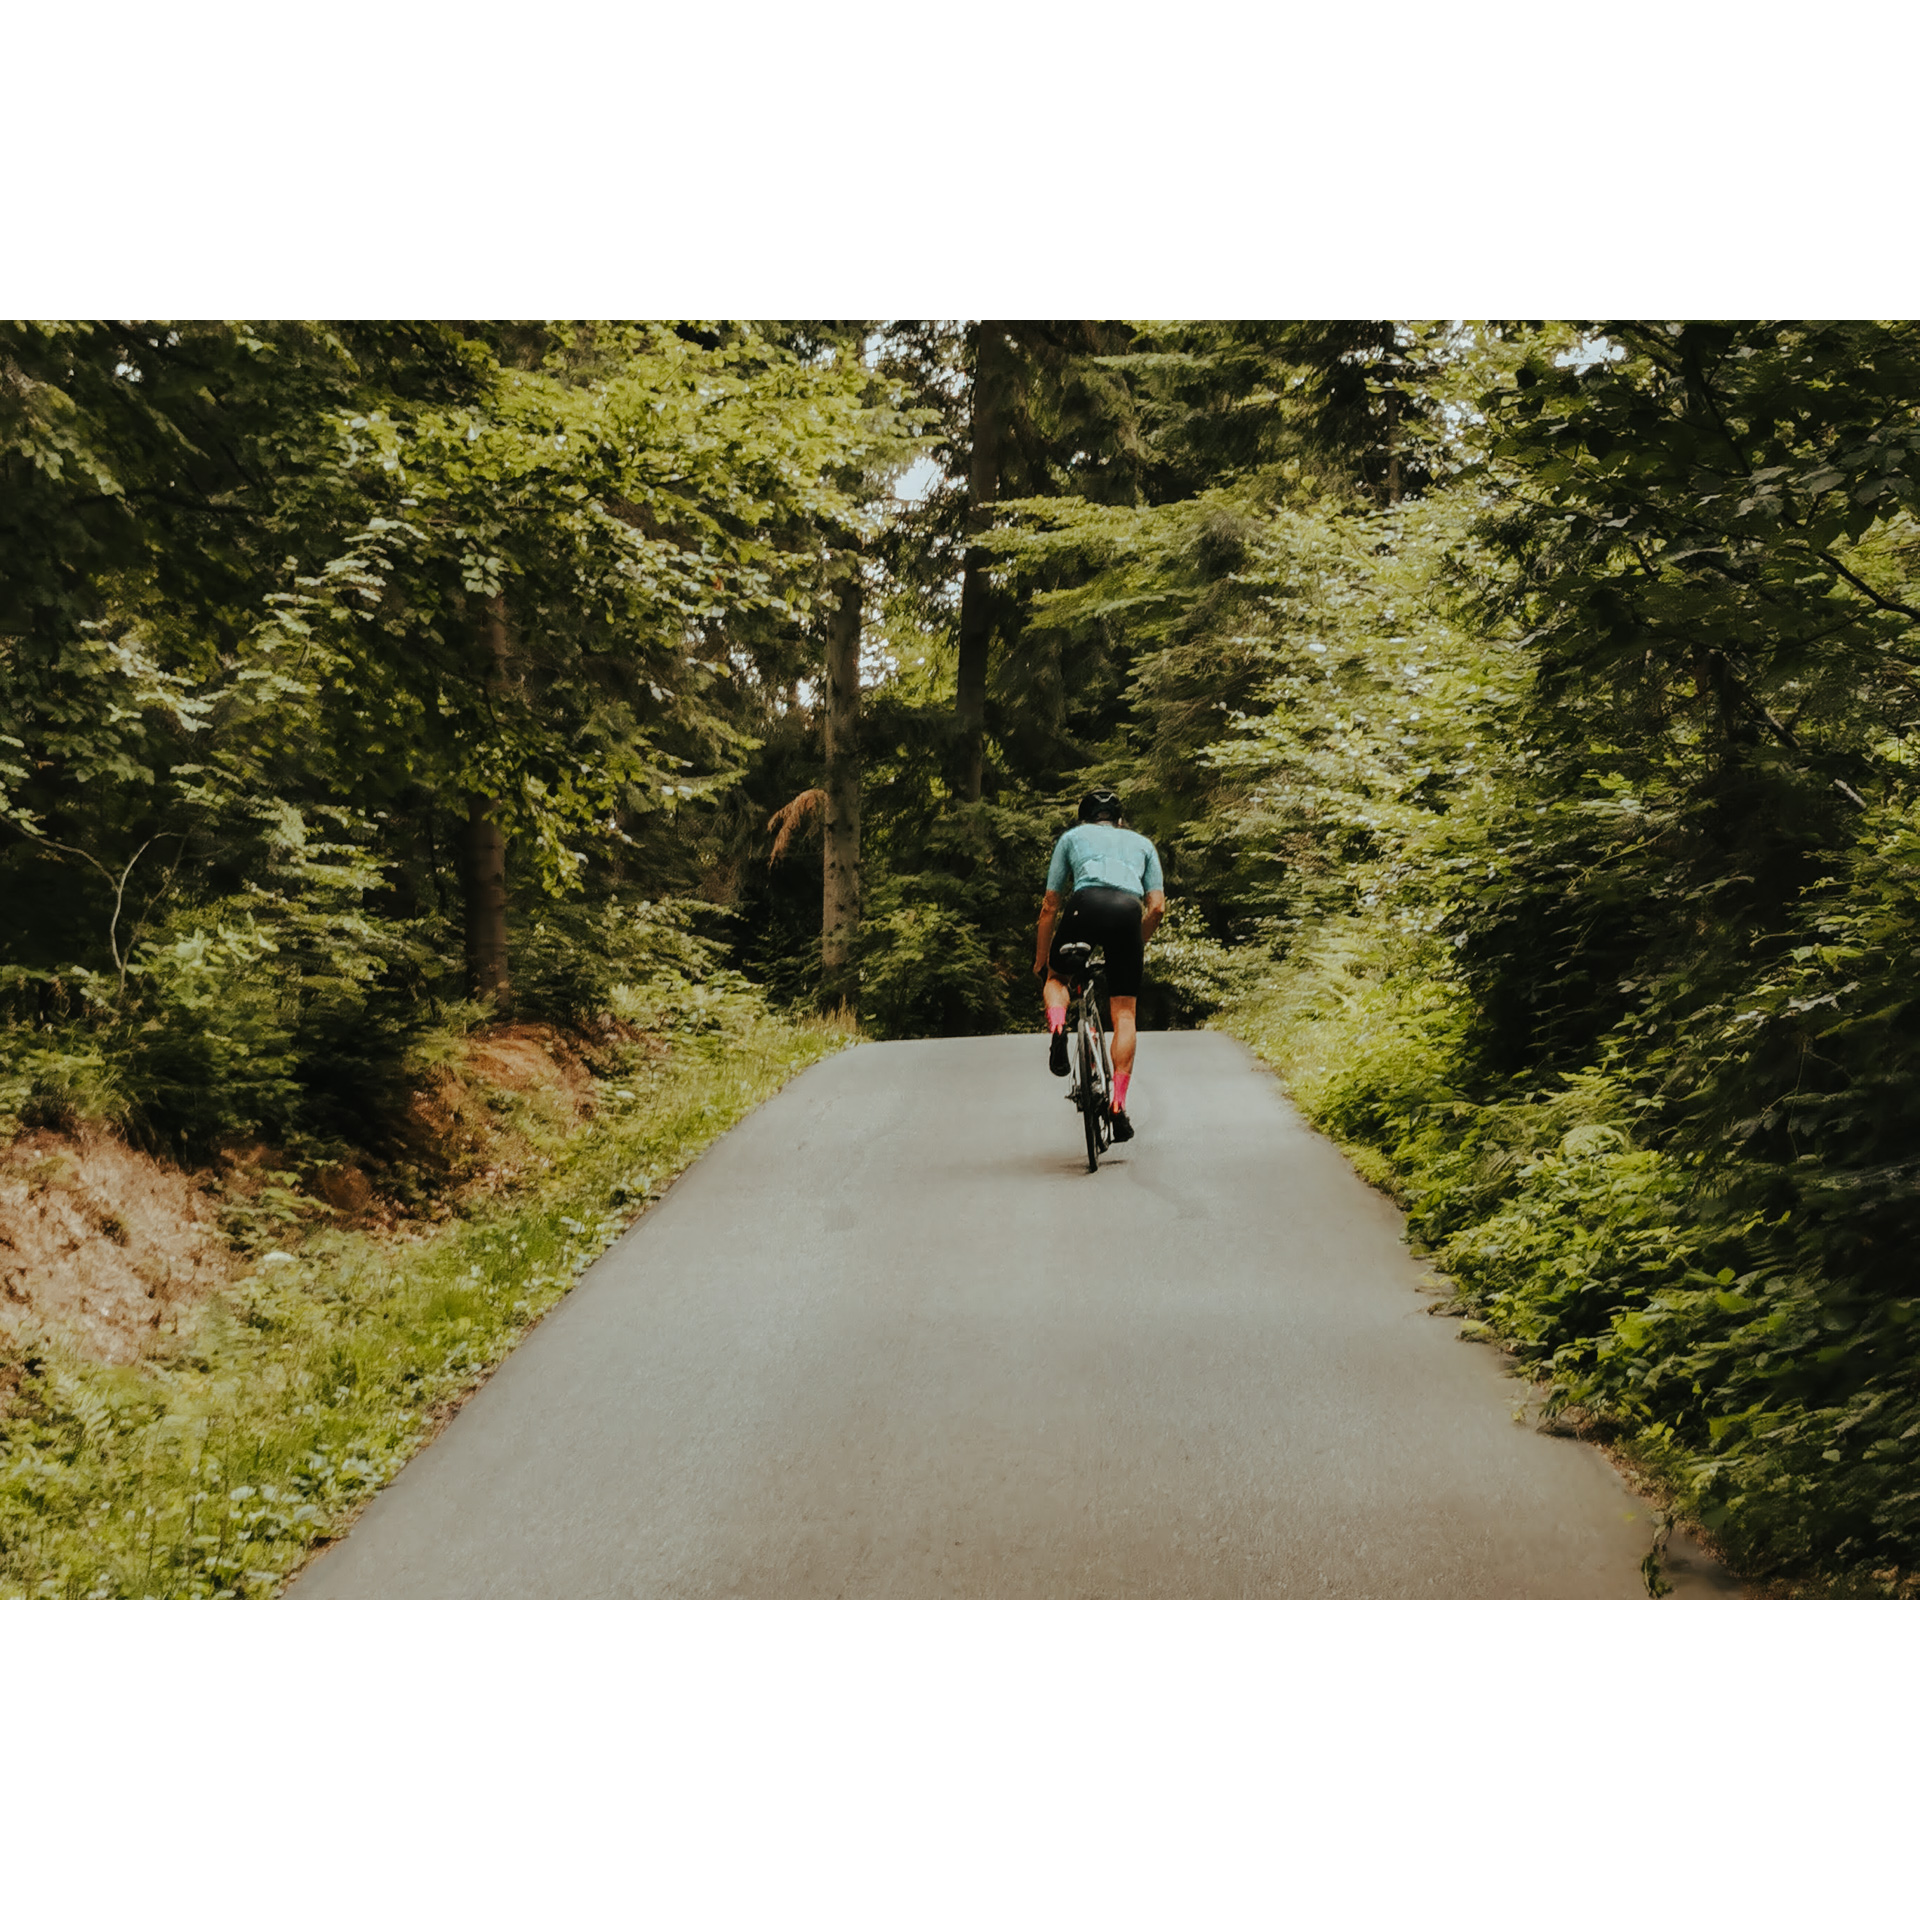 A cyclist in a blue T-shirt riding an asphalt road uphill among green trees